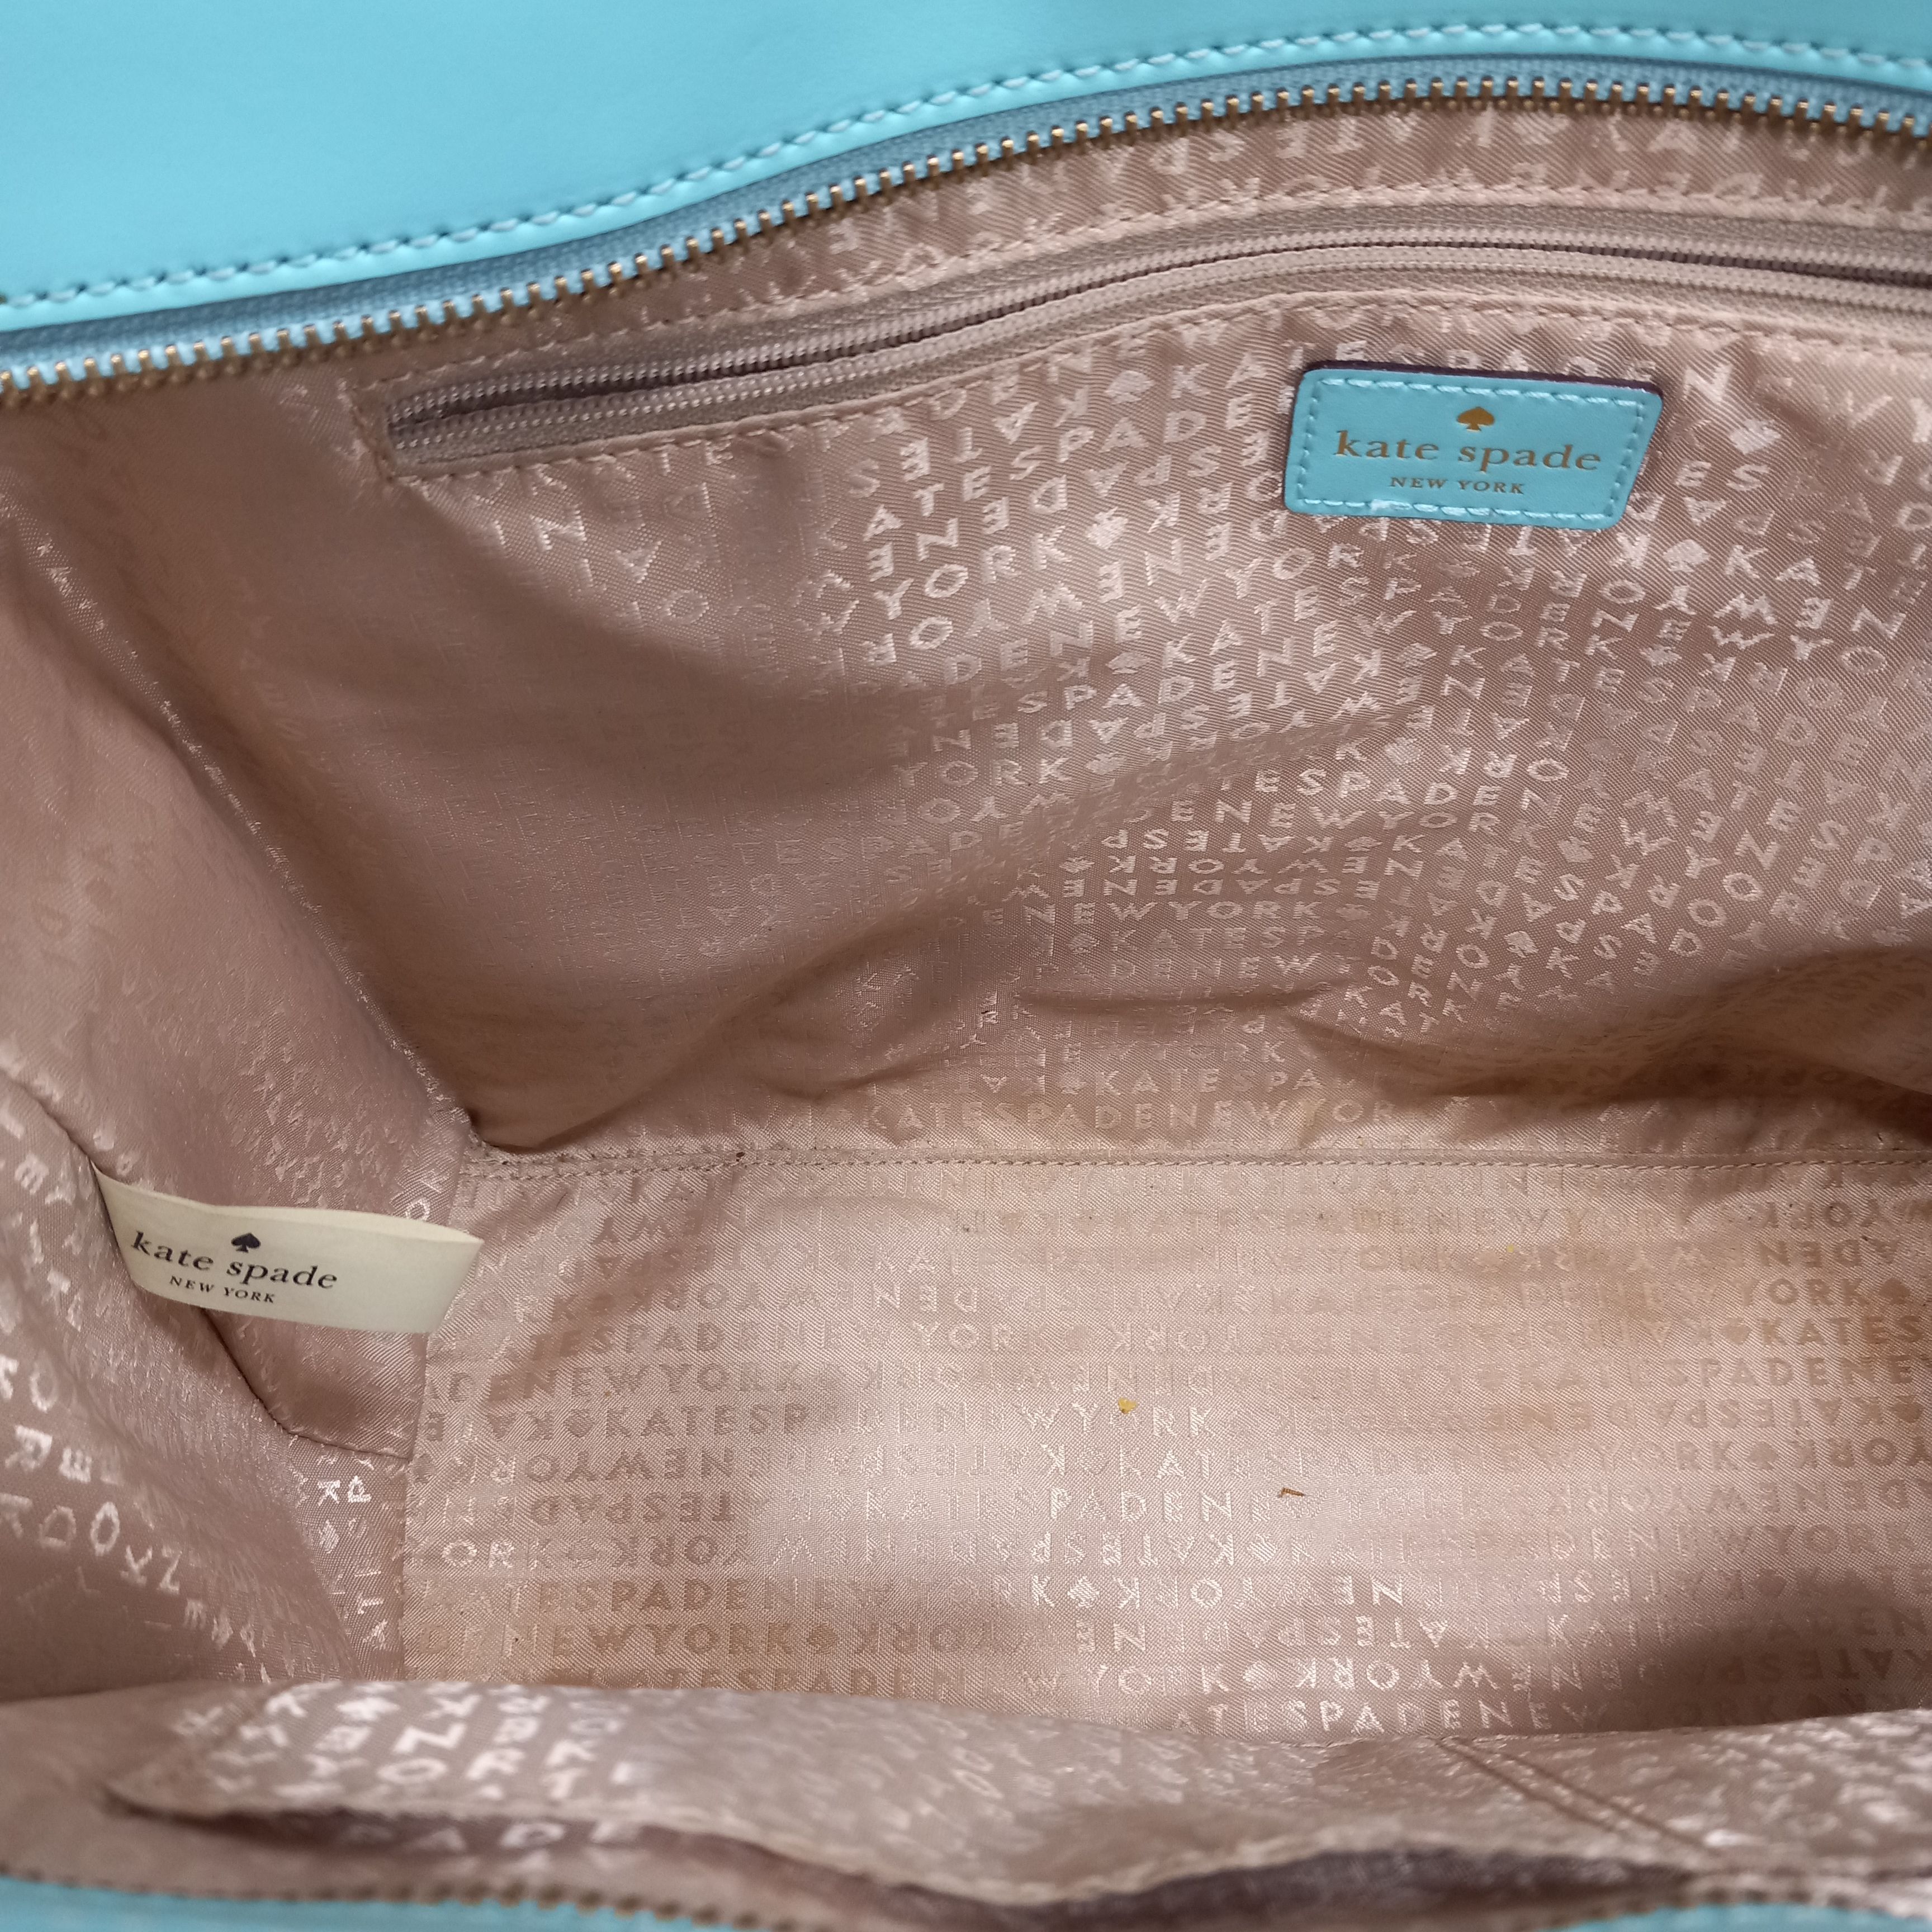 KATE SPADE TURQUOISE LEATHER PURSE WITH STRAP | Turquoise leather, Leather  purses, Kate spade